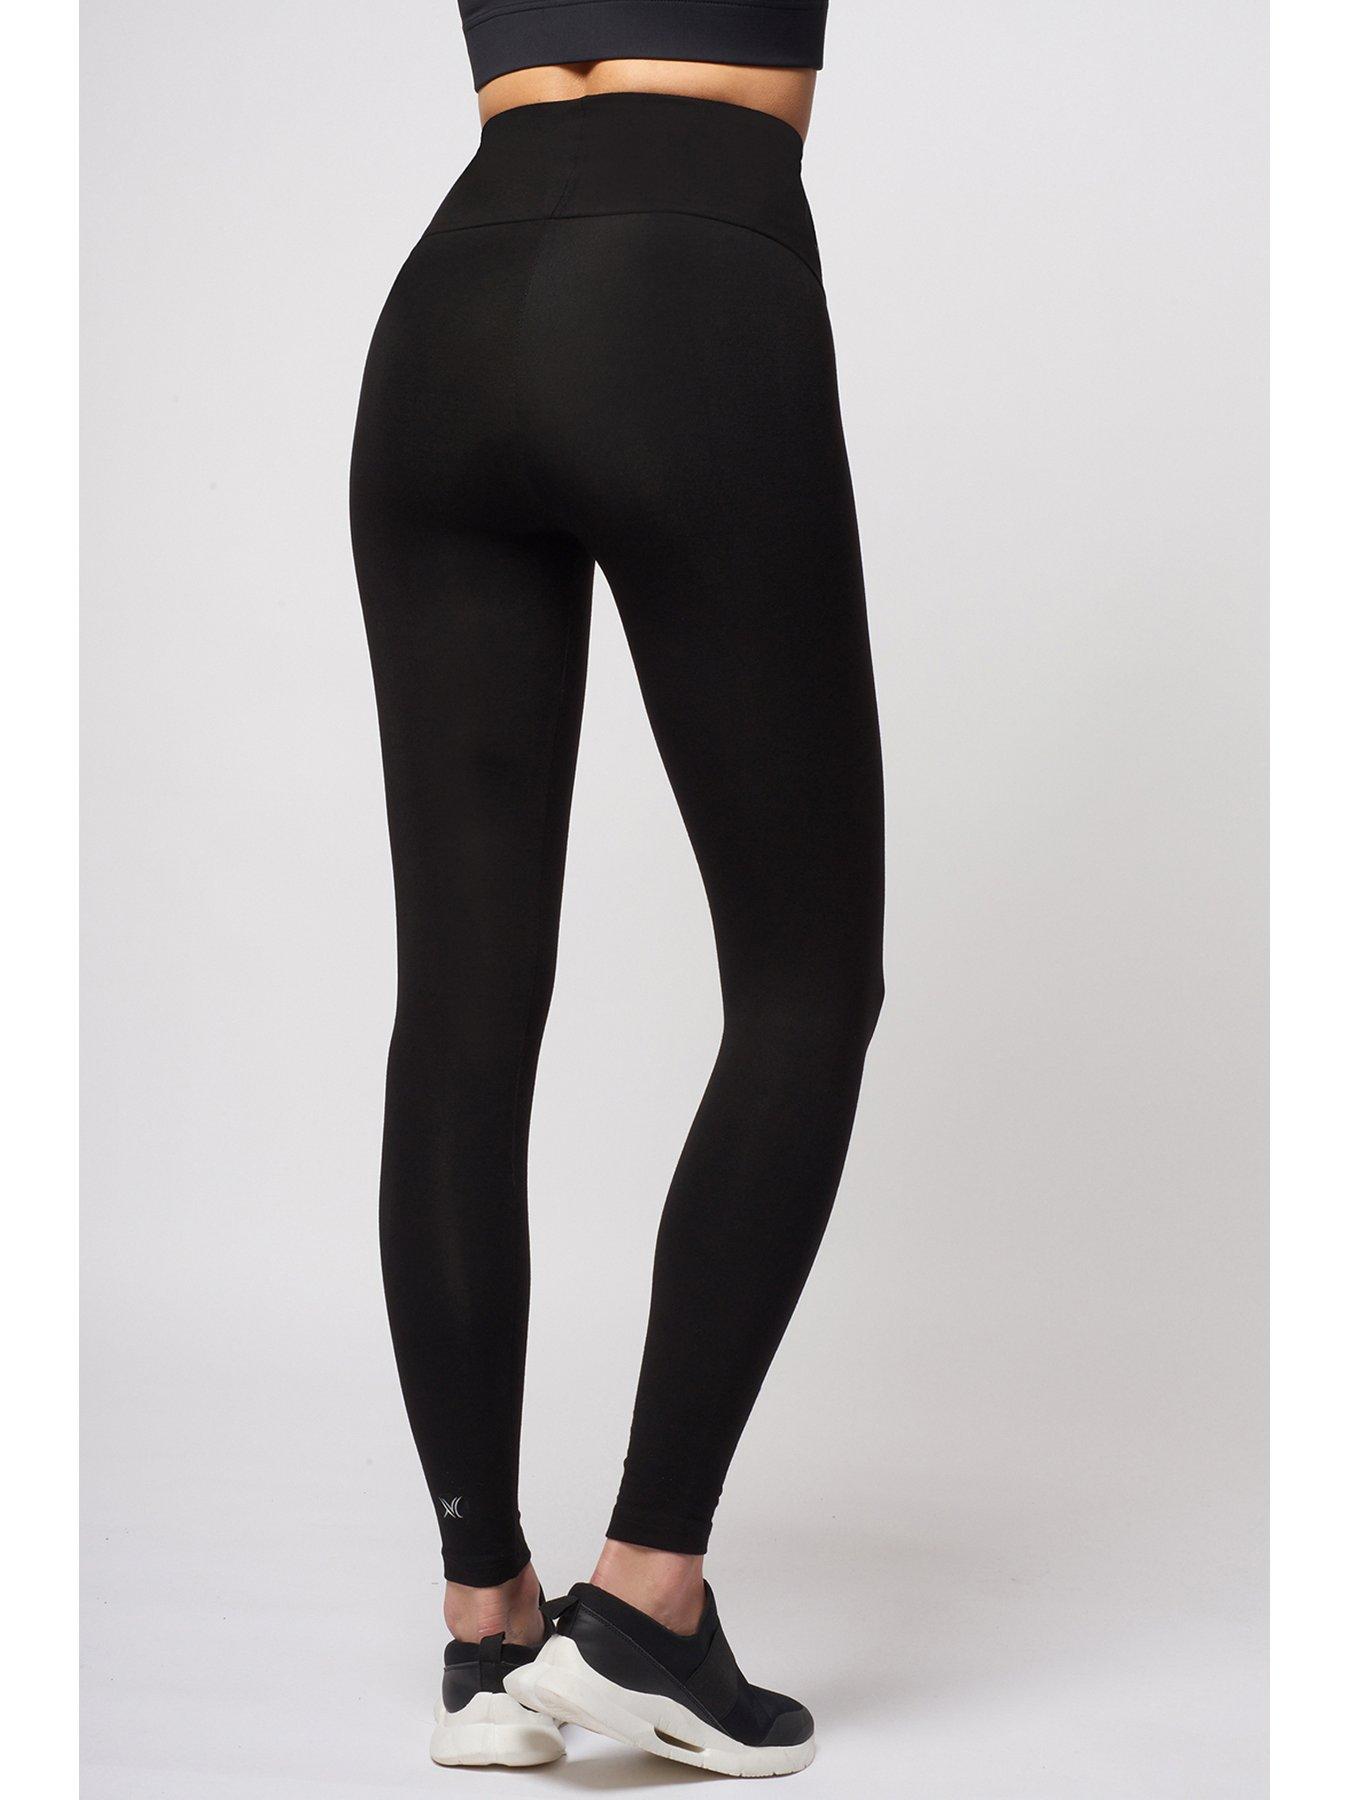 Leggings  Lightweight Strong Compression Leggings with High Tummy